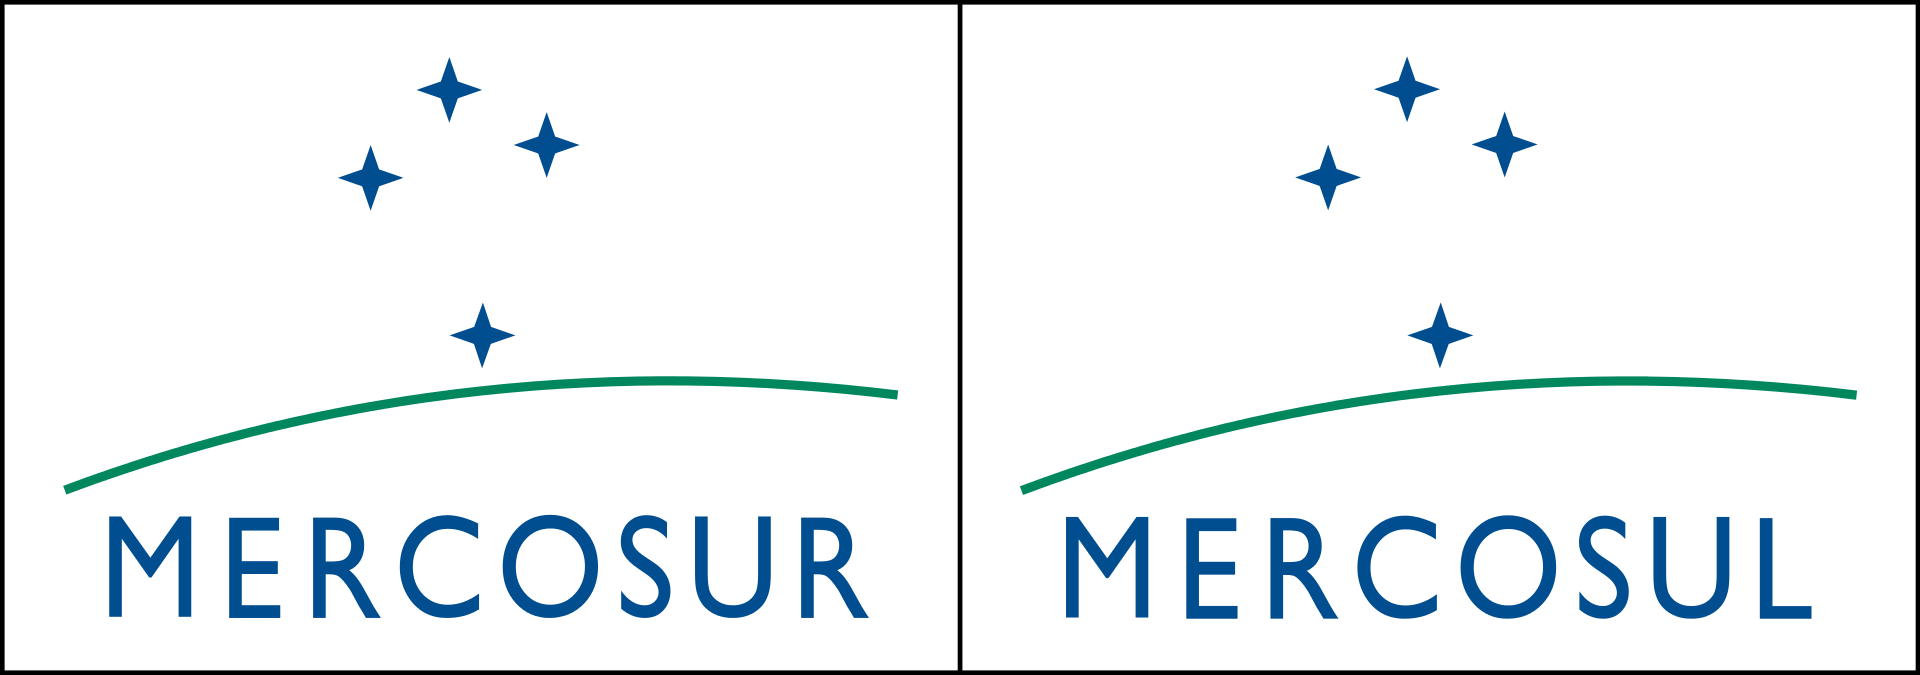 Flag of Mercosur.png